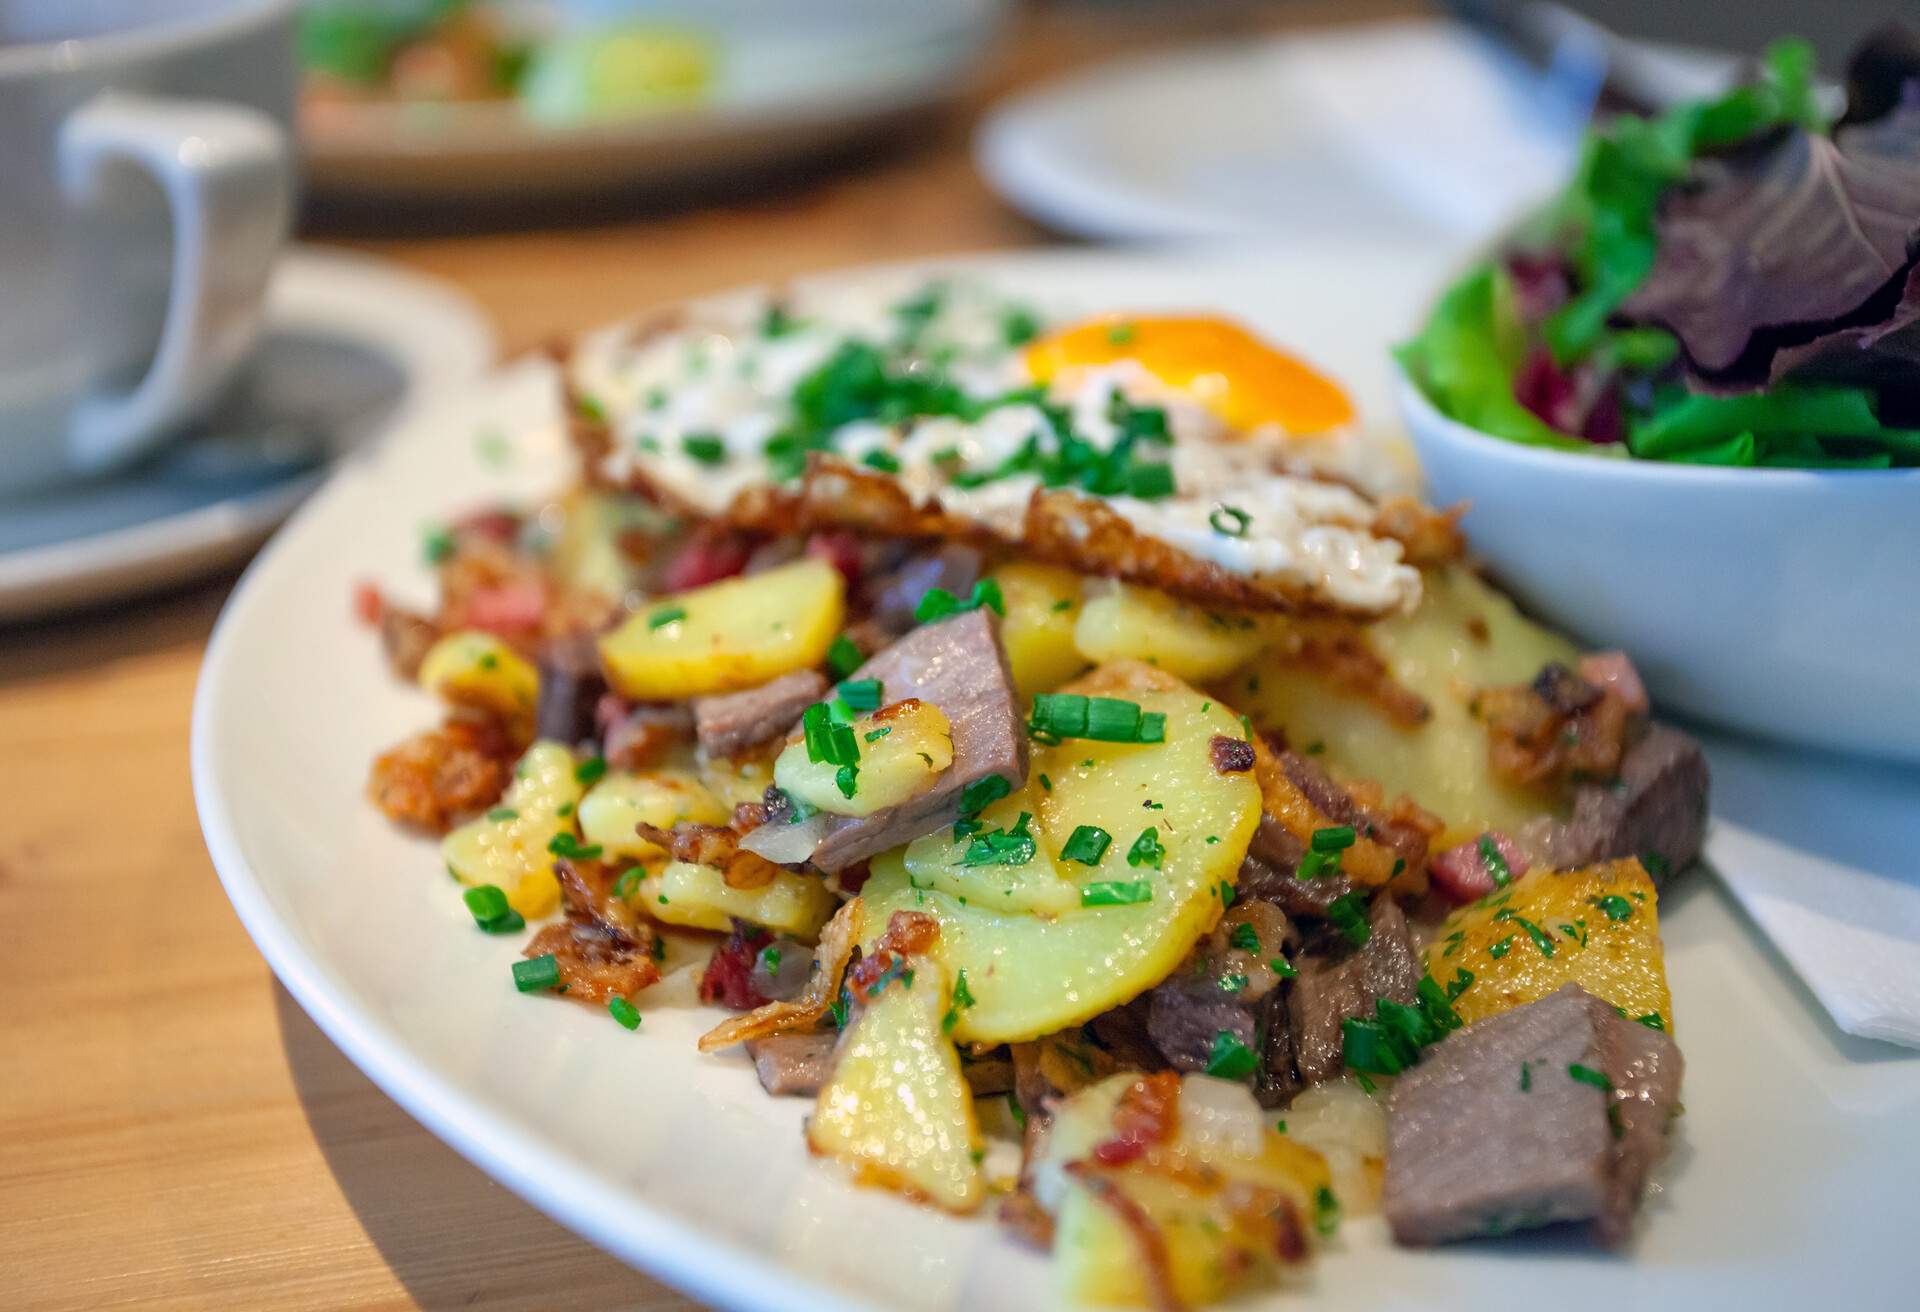 Tiroler Gröstl is a traditional dish from Tyrol you can find all around Austria. It is golden roasted potatoes with onion and ham. The dish is finished with chopped parsley and a fried egg.